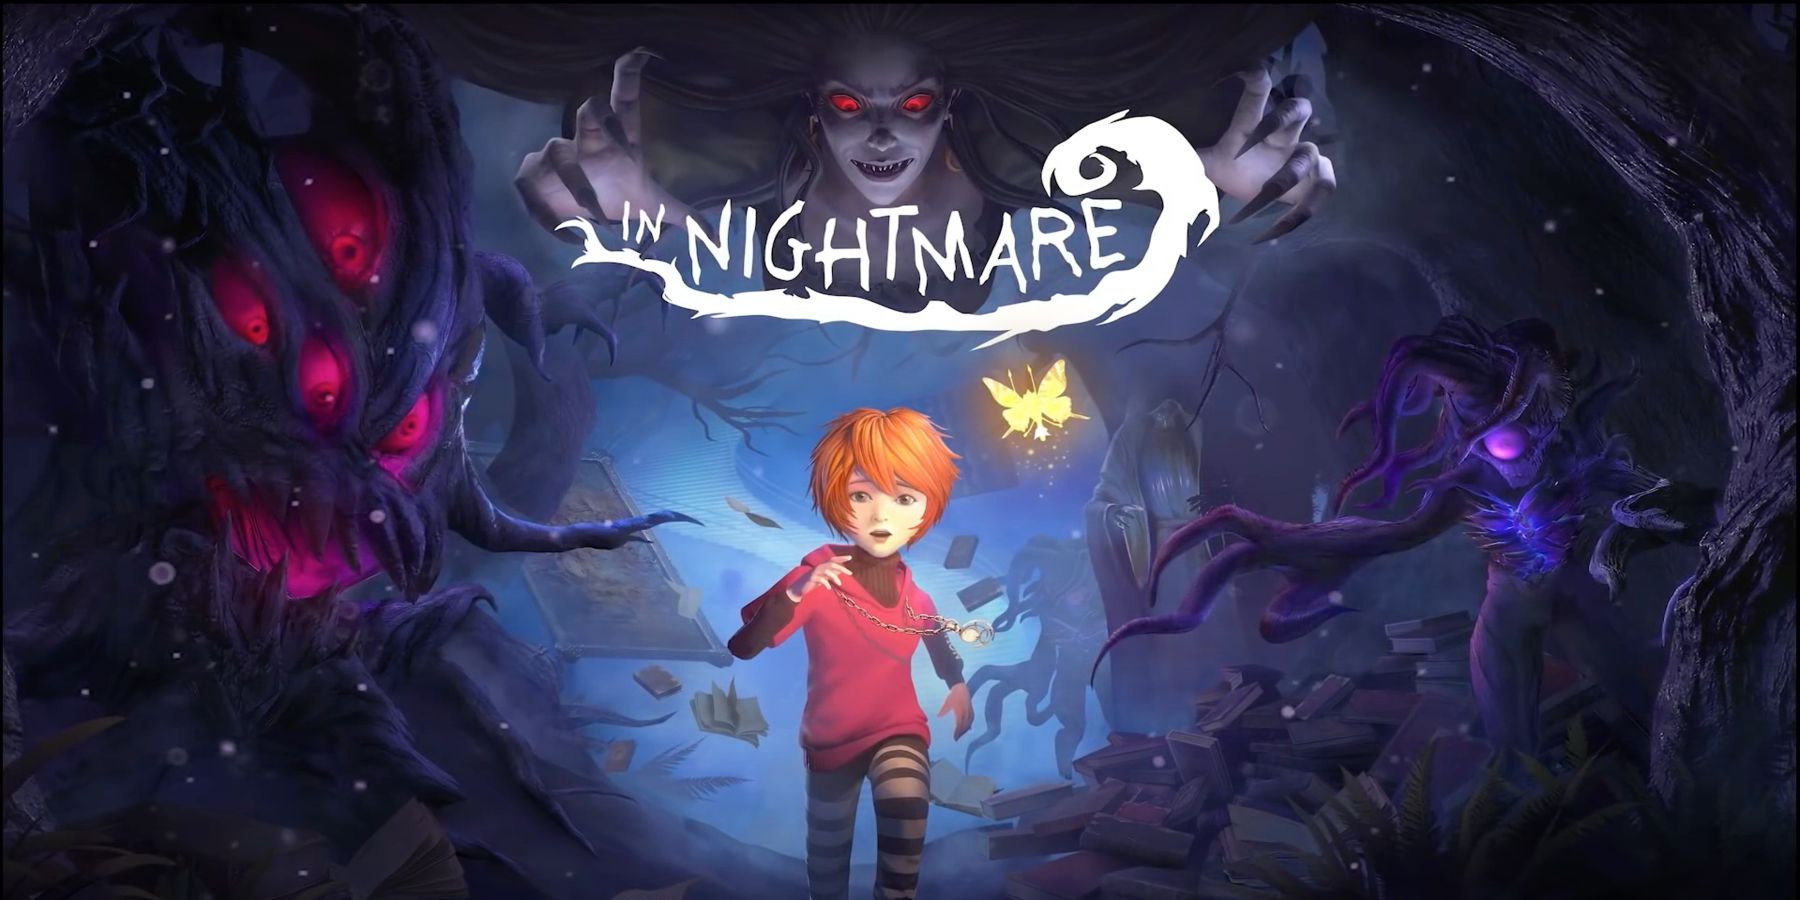 Horror Game In Nightmare Gets Release Date With New Trailer